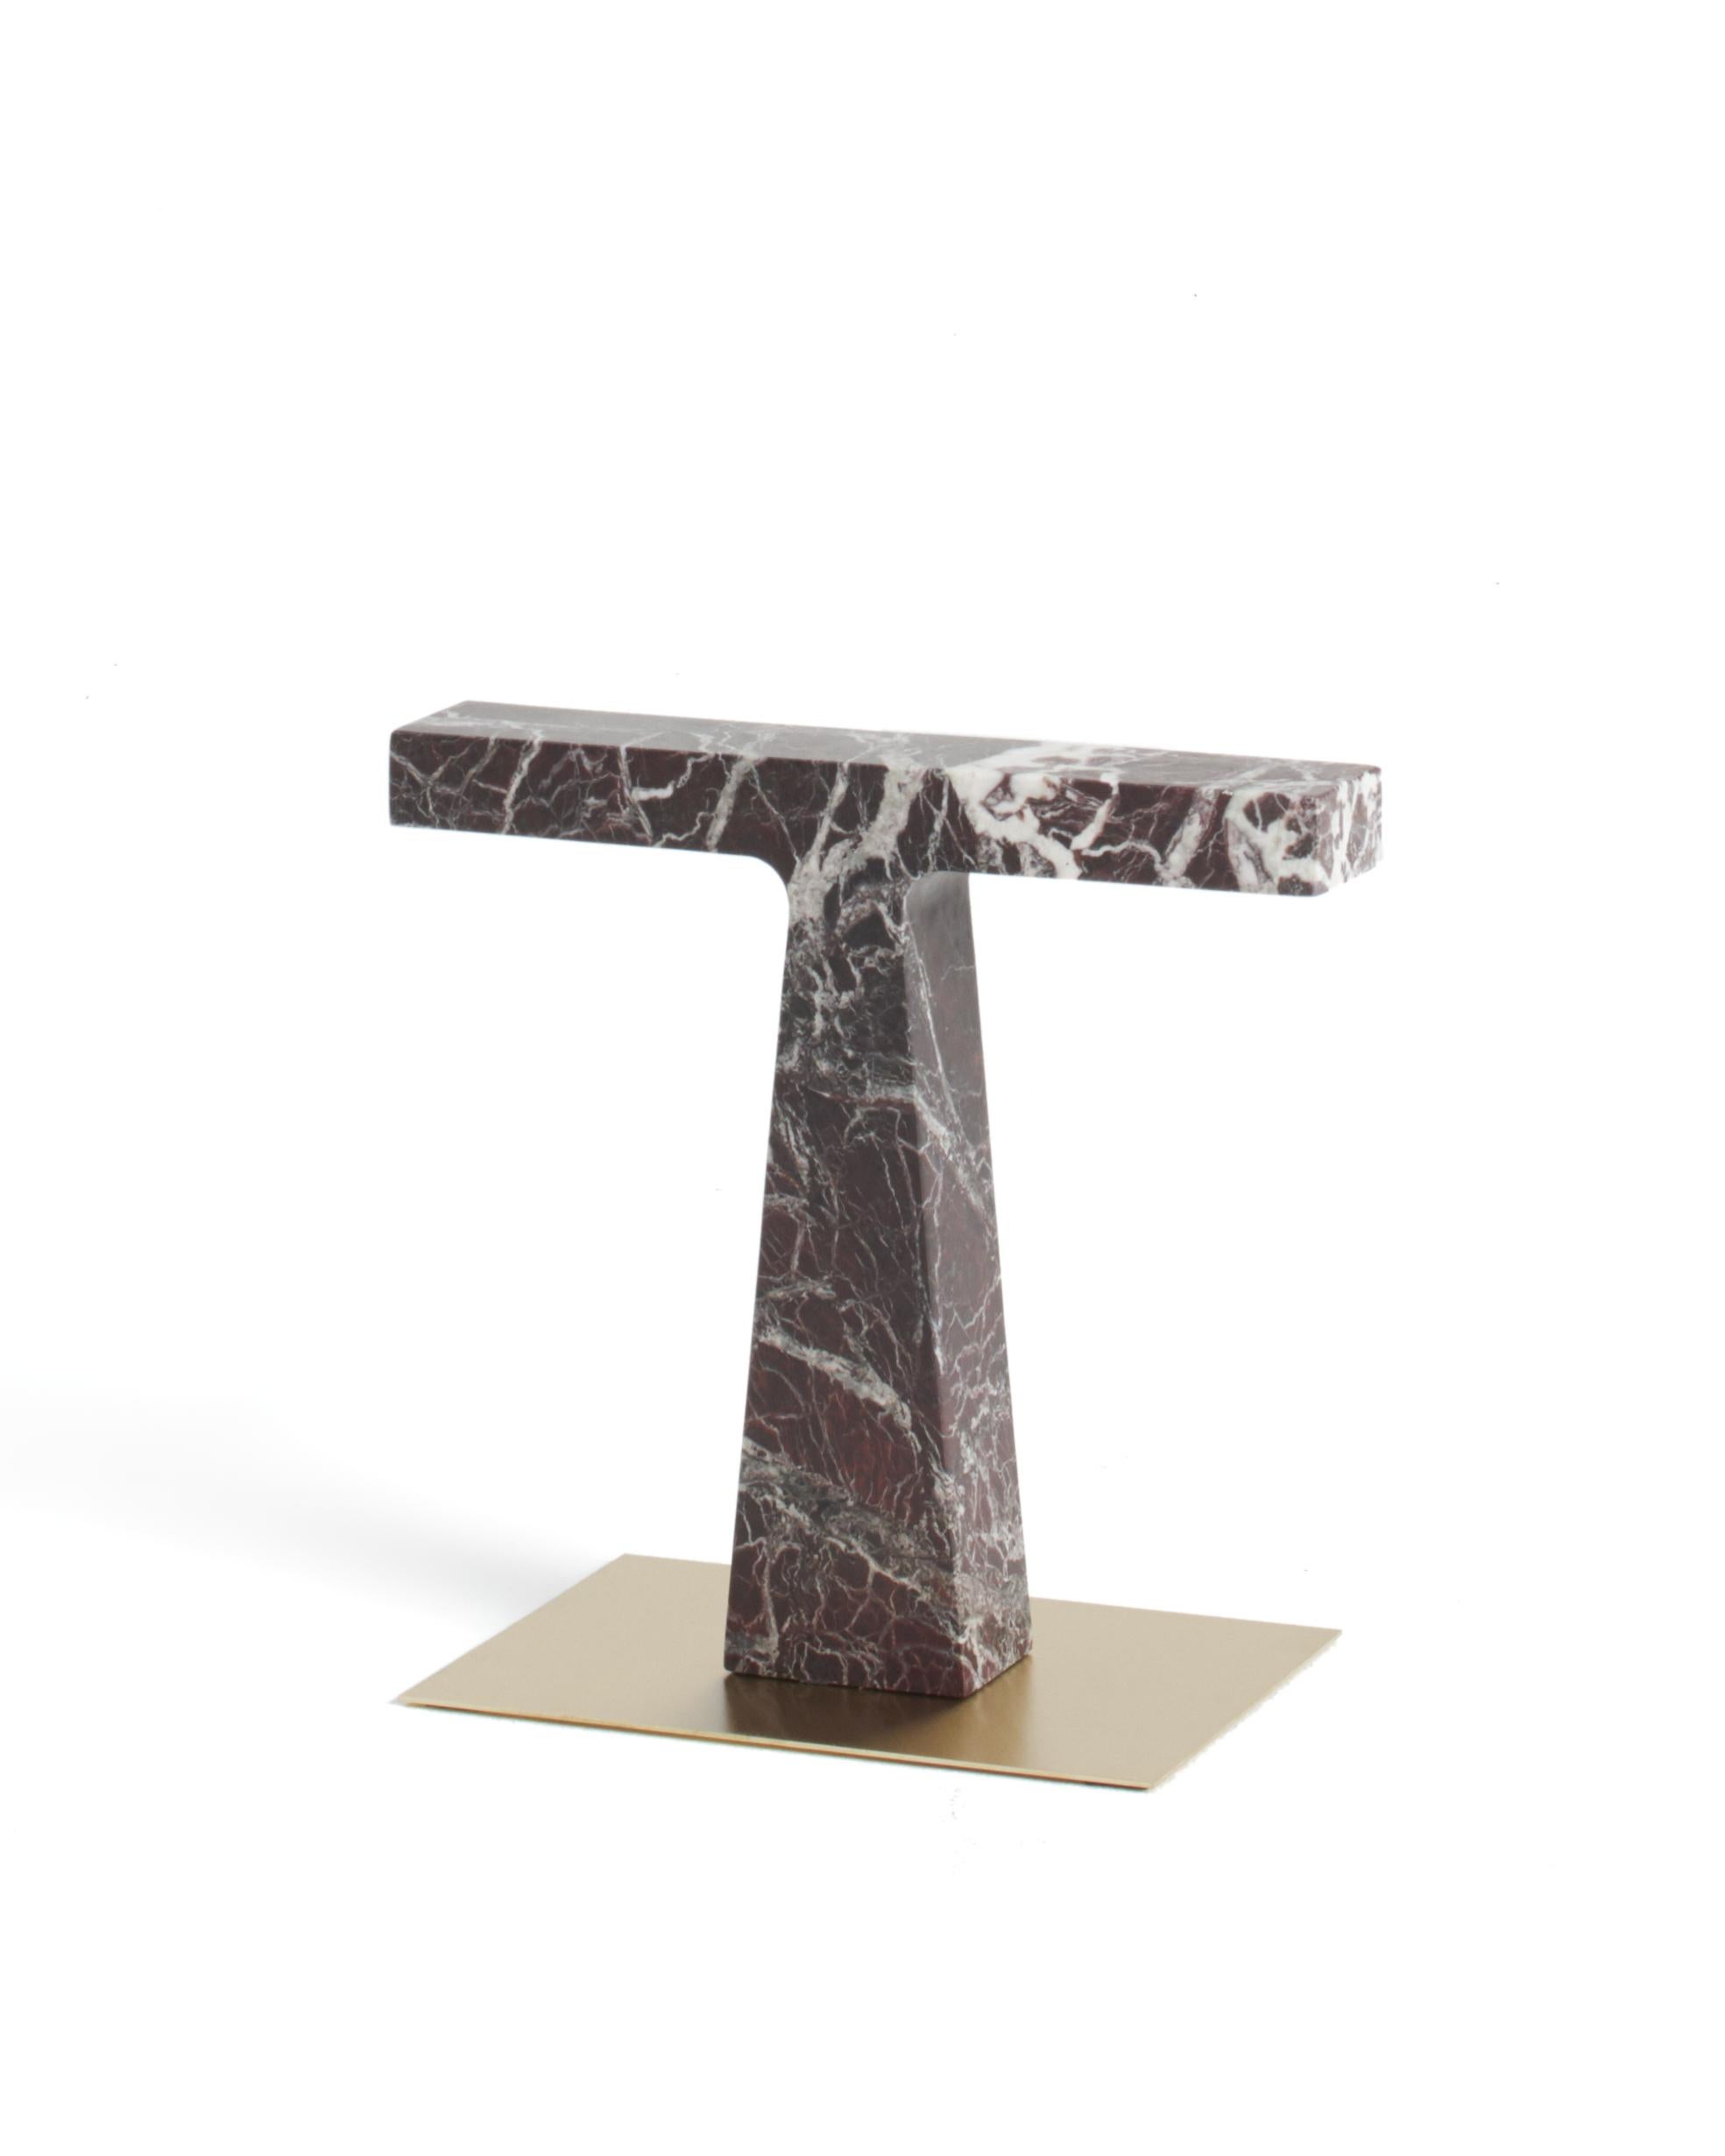 Bruchi marble table lamp by Niko Koronis
Dimensions: W 37.5 x D 7 x H 35
Materials: Rosso Levanto

Also Available: Verde Guatemala.

All our lamps can be wired according to each country. If sold to the USA it will be wired for the USA for